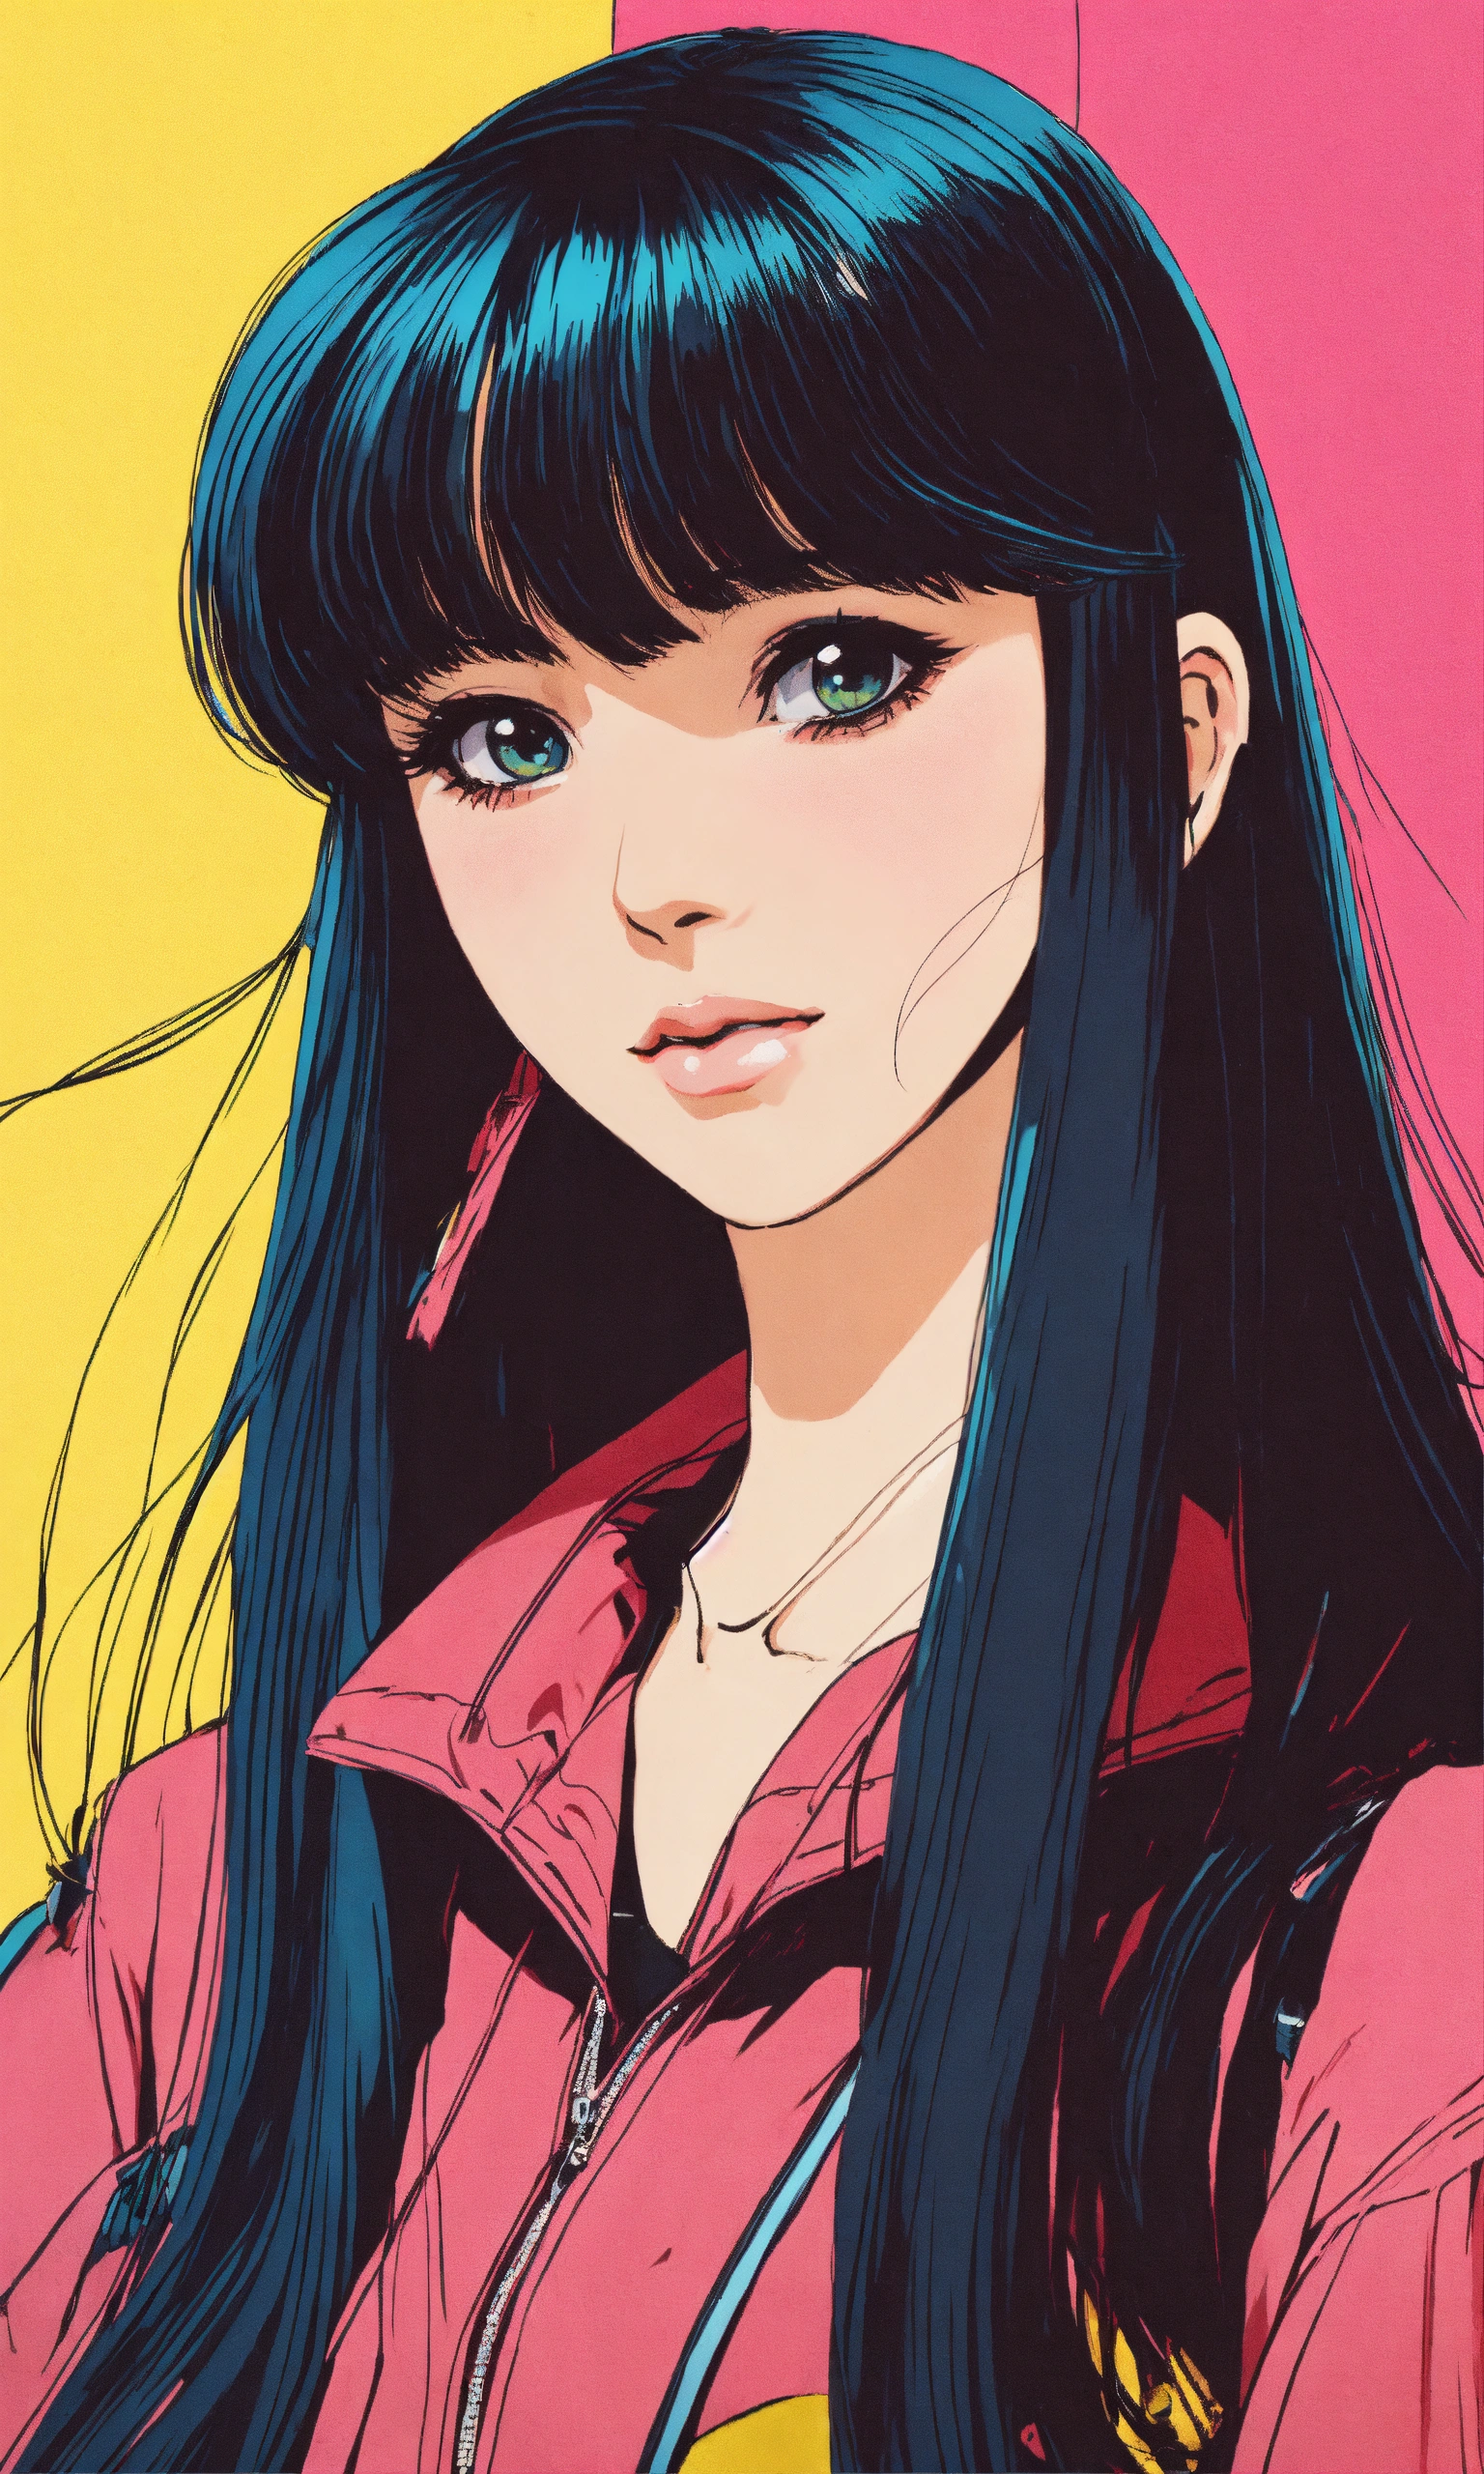 Lexica - A girl with long straight hair in 80’s anime vintage style